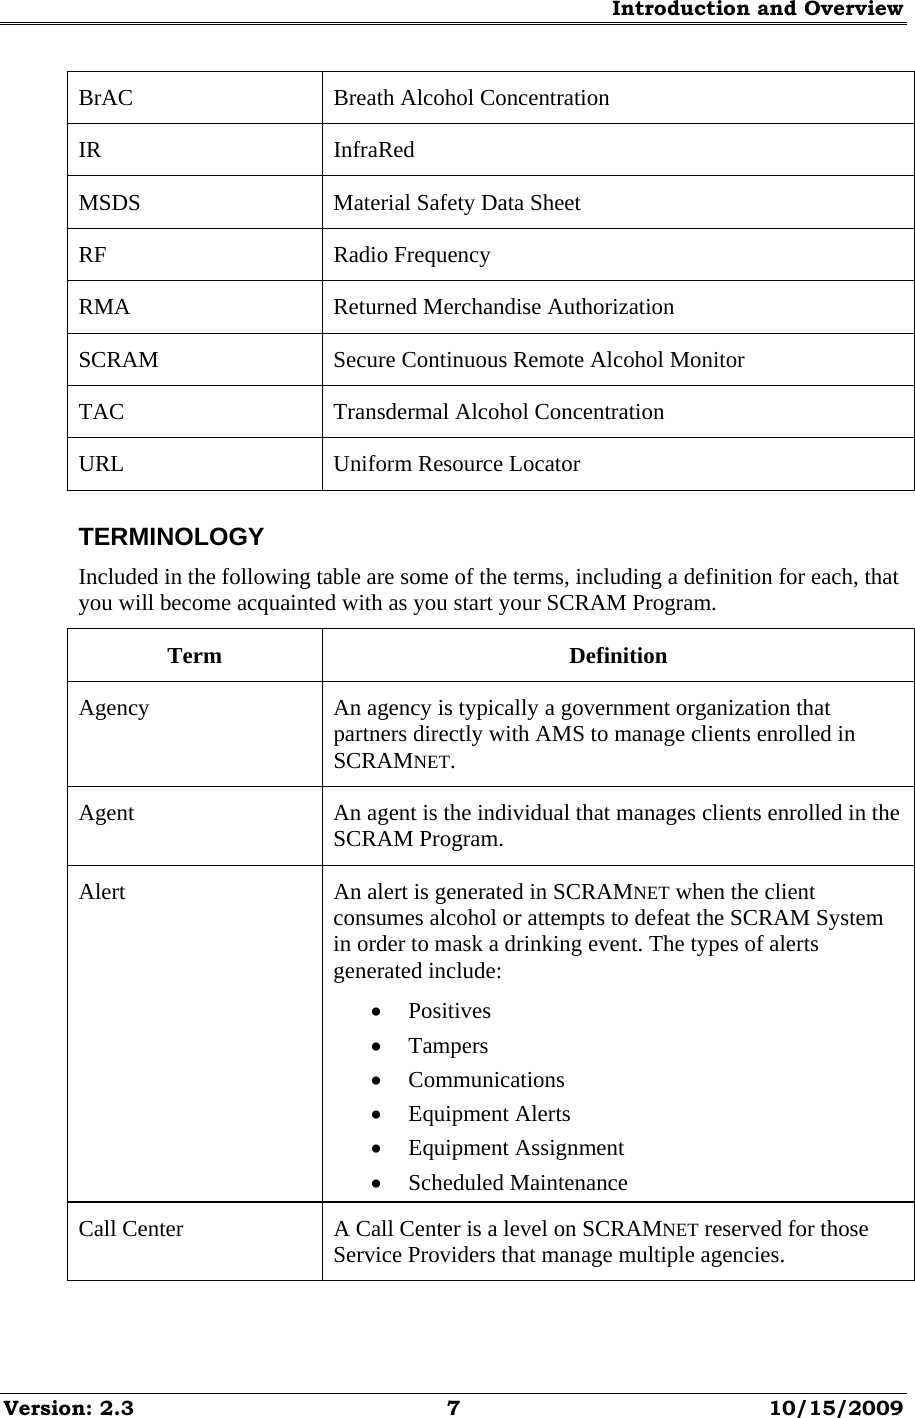 Introduction and Overview Version: 2.3  7  10/15/2009 BrAC  Breath Alcohol Concentration IR InfraRed MSDS  Material Safety Data Sheet RF Radio Frequency RMA  Returned Merchandise Authorization SCRAM  Secure Continuous Remote Alcohol Monitor TAC Transdermal Alcohol Concentration URL  Uniform Resource Locator TERMINOLOGY Included in the following table are some of the terms, including a definition for each, that you will become acquainted with as you start your SCRAM Program. Term Definition Agency  An agency is typically a government organization that partners directly with AMS to manage clients enrolled in SCRAMNET. Agent  An agent is the individual that manages clients enrolled in the SCRAM Program. Alert  An alert is generated in SCRAMNET when the client consumes alcohol or attempts to defeat the SCRAM System in order to mask a drinking event. The types of alerts generated include: • Positives • Tampers • Communications • Equipment Alerts • Equipment Assignment • Scheduled Maintenance Call Center  A Call Center is a level on SCRAMNET reserved for those Service Providers that manage multiple agencies. 